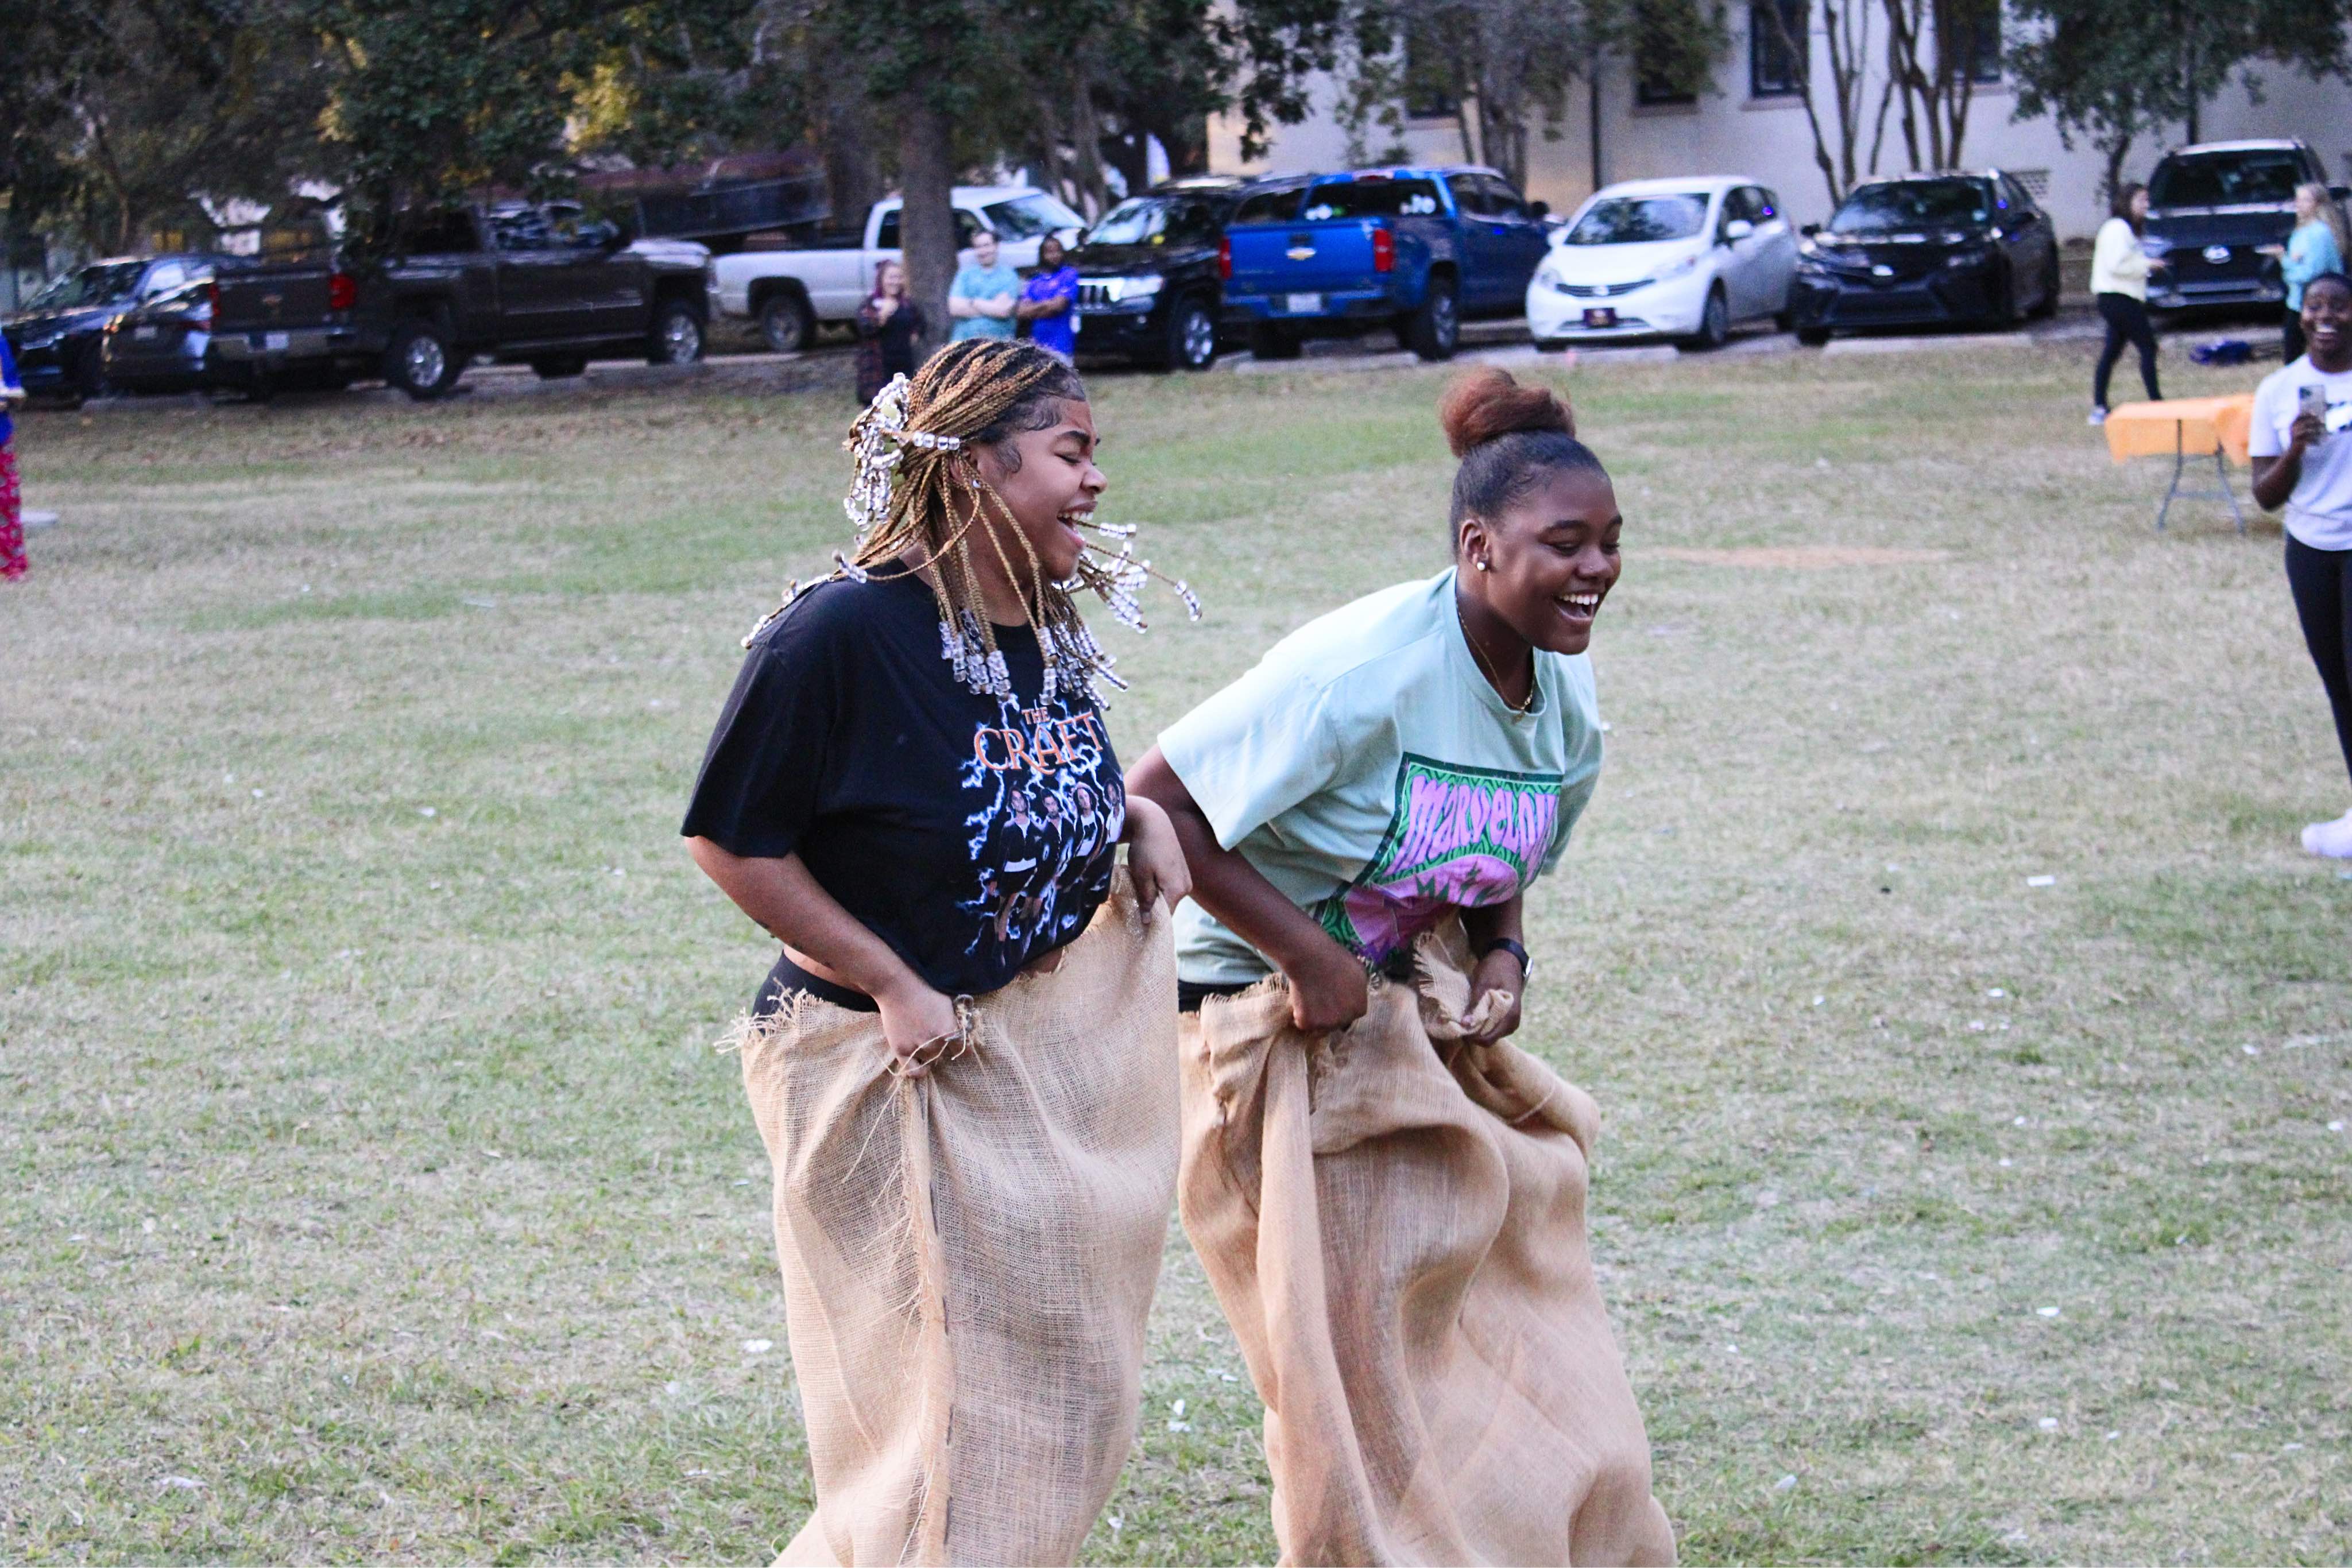 residents competing in a sack race at a community event